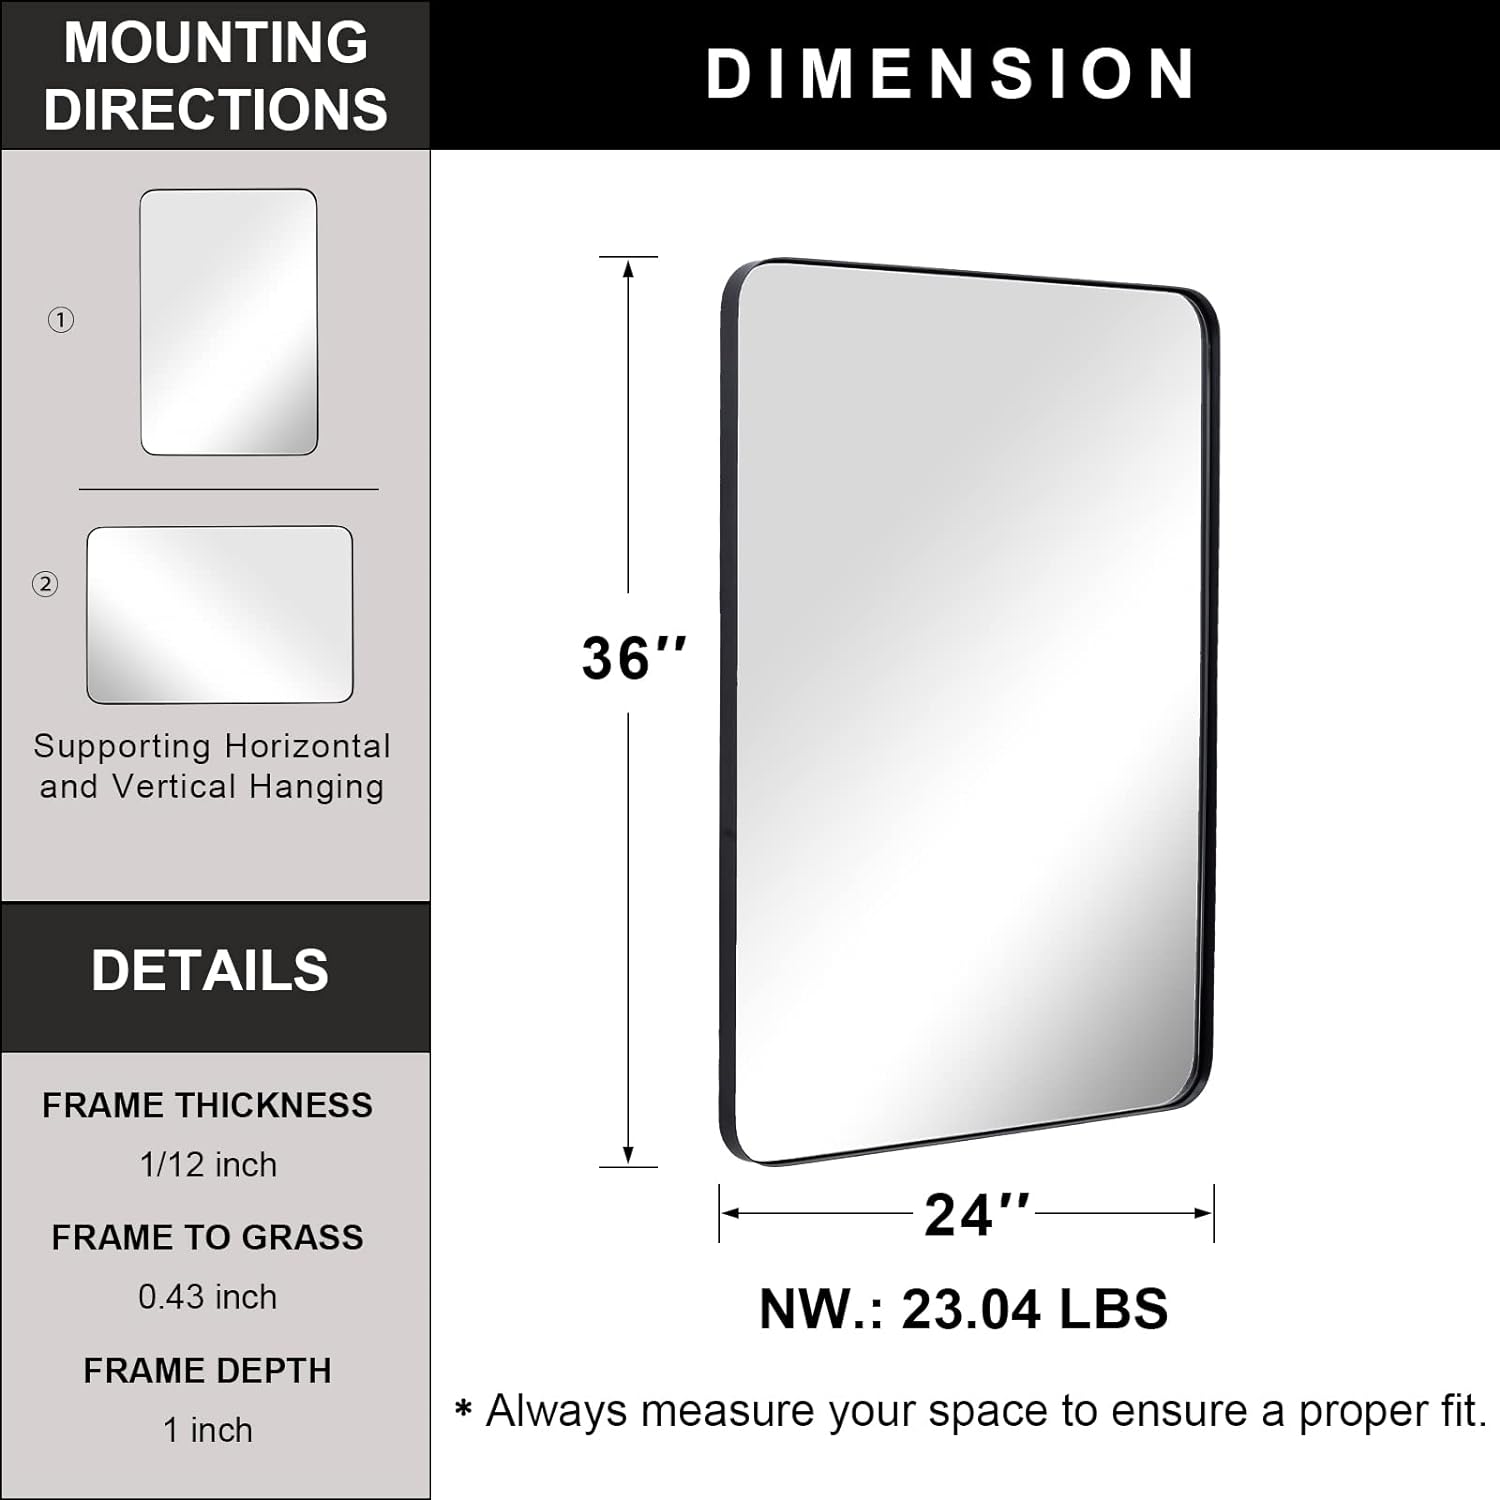 Great Choice Products Wall Mirror For Bathroom, 24X36 Inch Black Bathroom Mirror, Stainless Steel Metal Frame With Rounded Corner, Rectangle Glass …